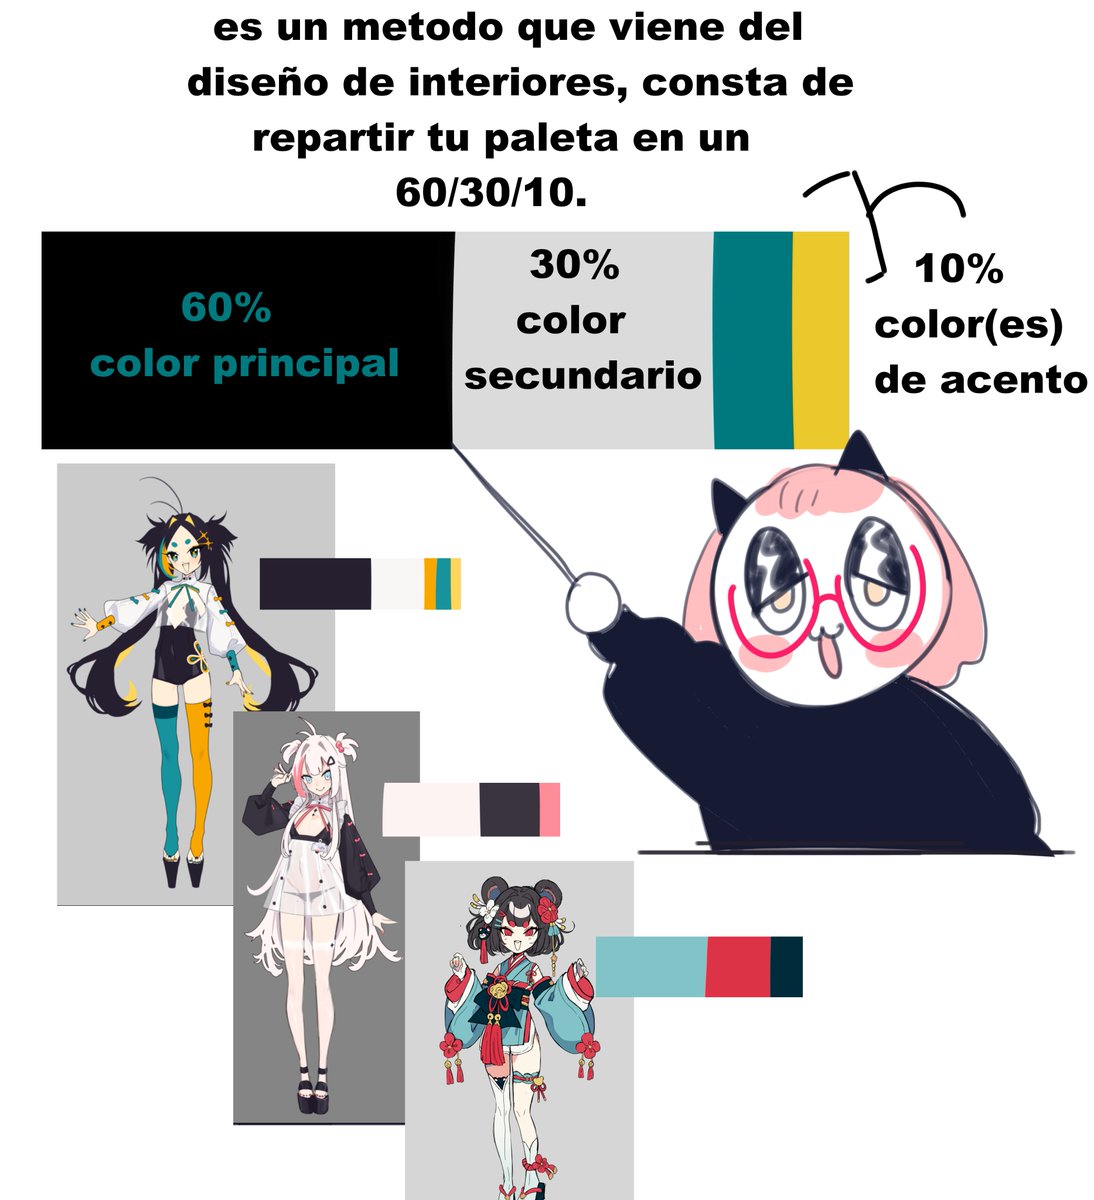 share this here too, it's the 'trick' i use to distribute the colors in my designs. 'This decorating rule suggests that you should cover your room with 60% of a dominant color, 30% of a secondary color, and 10% of an accent shade' i just apply this to my characters designs jejej